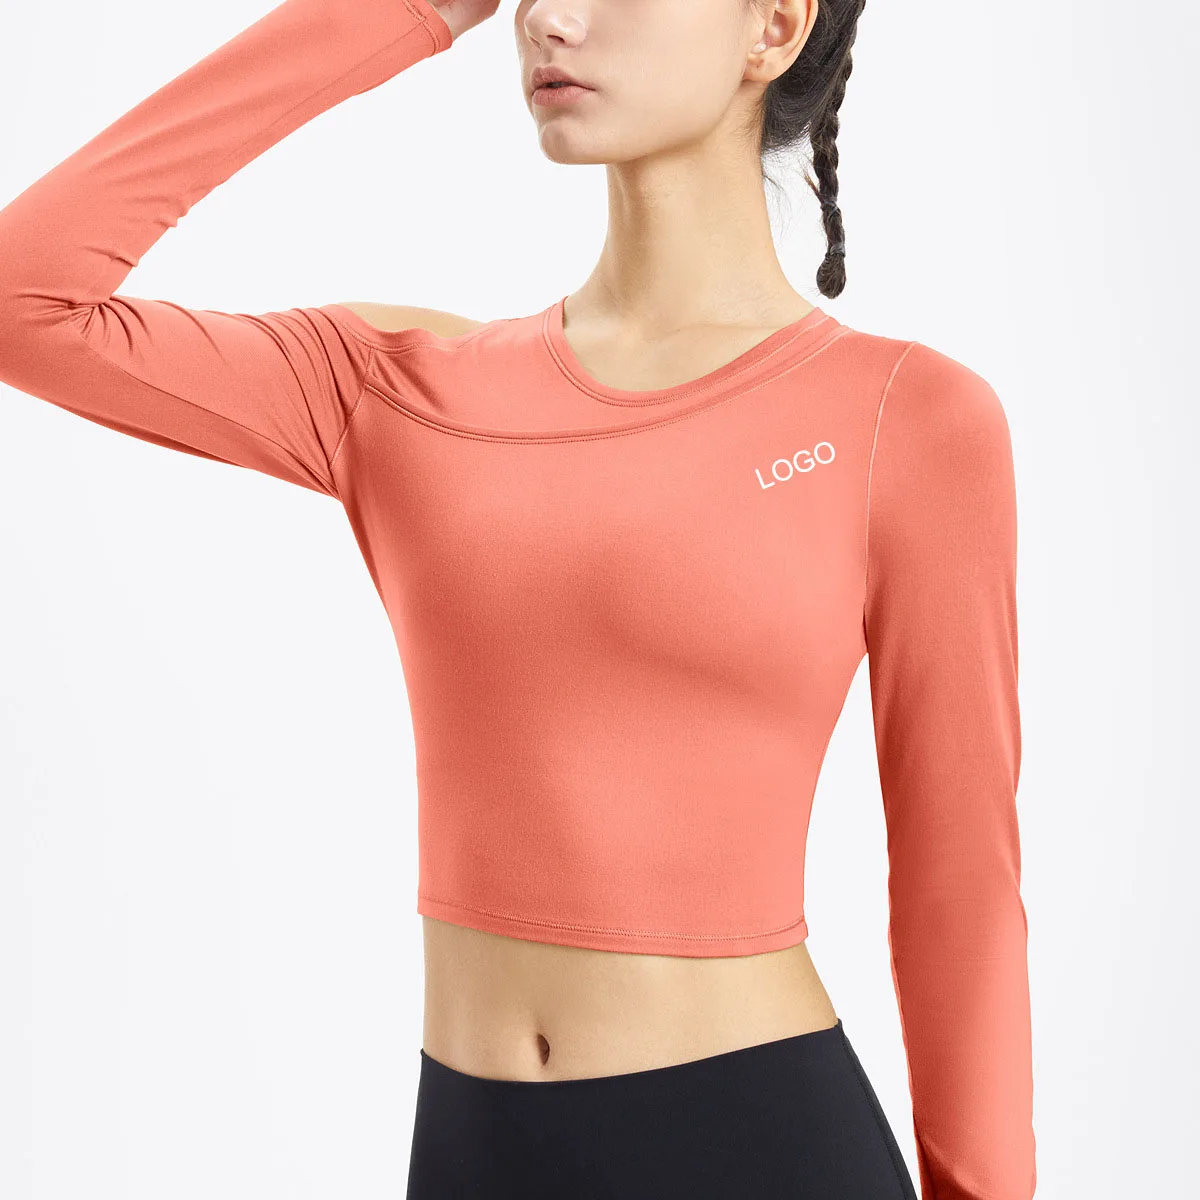 

Proper Price High Quality Slim Fit Off-The-Shoulder Ropa Deportiva De Mujer Long Sleeve Crop Yoga Tops Fitness Women's T-Shirts, Customized colors